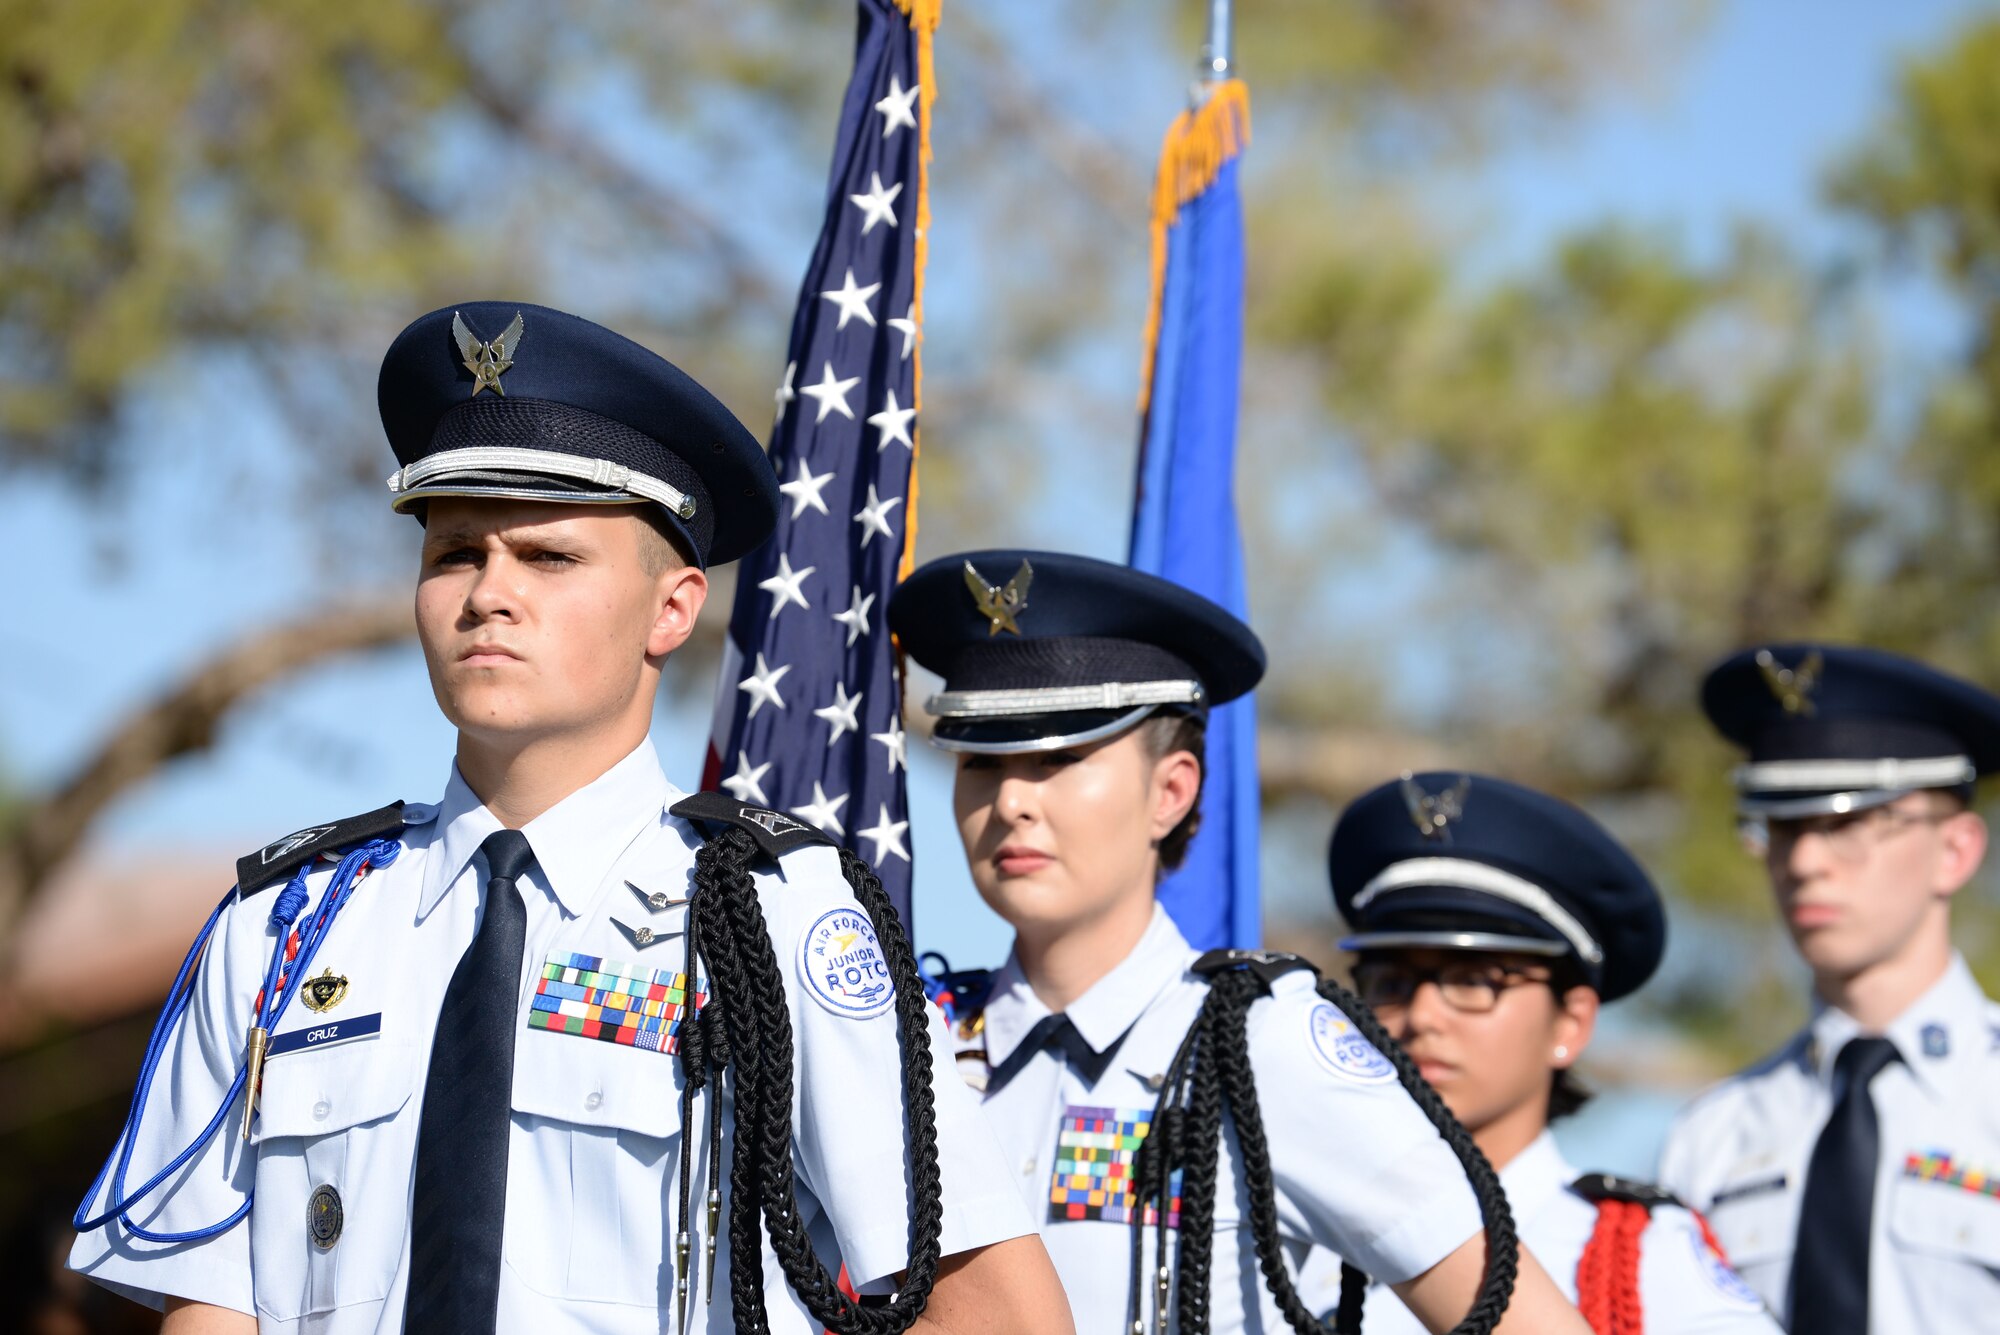 Four Rancho High School Honor Guardsmen stand in preparation for the Prisoner of War/Missing in Action Ceremony at Freedom Park on Nellis Air Force Base Nev., Sept. 21, 2018.  National POW/MIA day falls on every third Friday of September to commemorate service members who have and haven’t made it back. (U.S. Air Force photo by Airman 1st Class Bryan T. Guthrie)